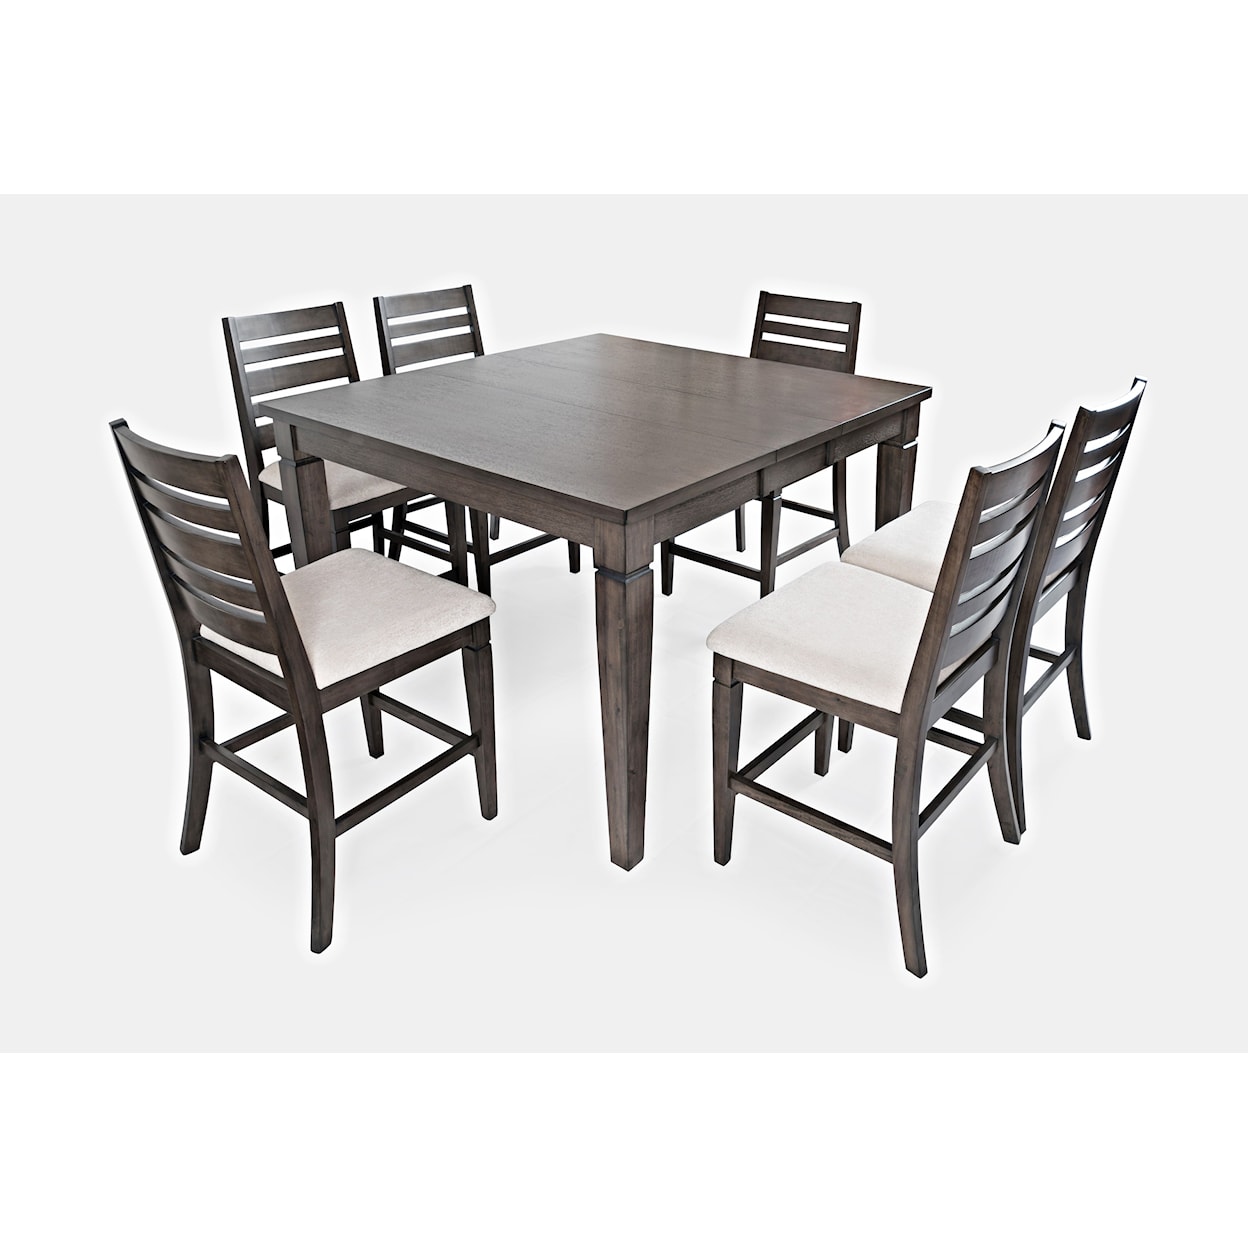 VFM Signature Lincoln Square Counter Height Table and Chair Set